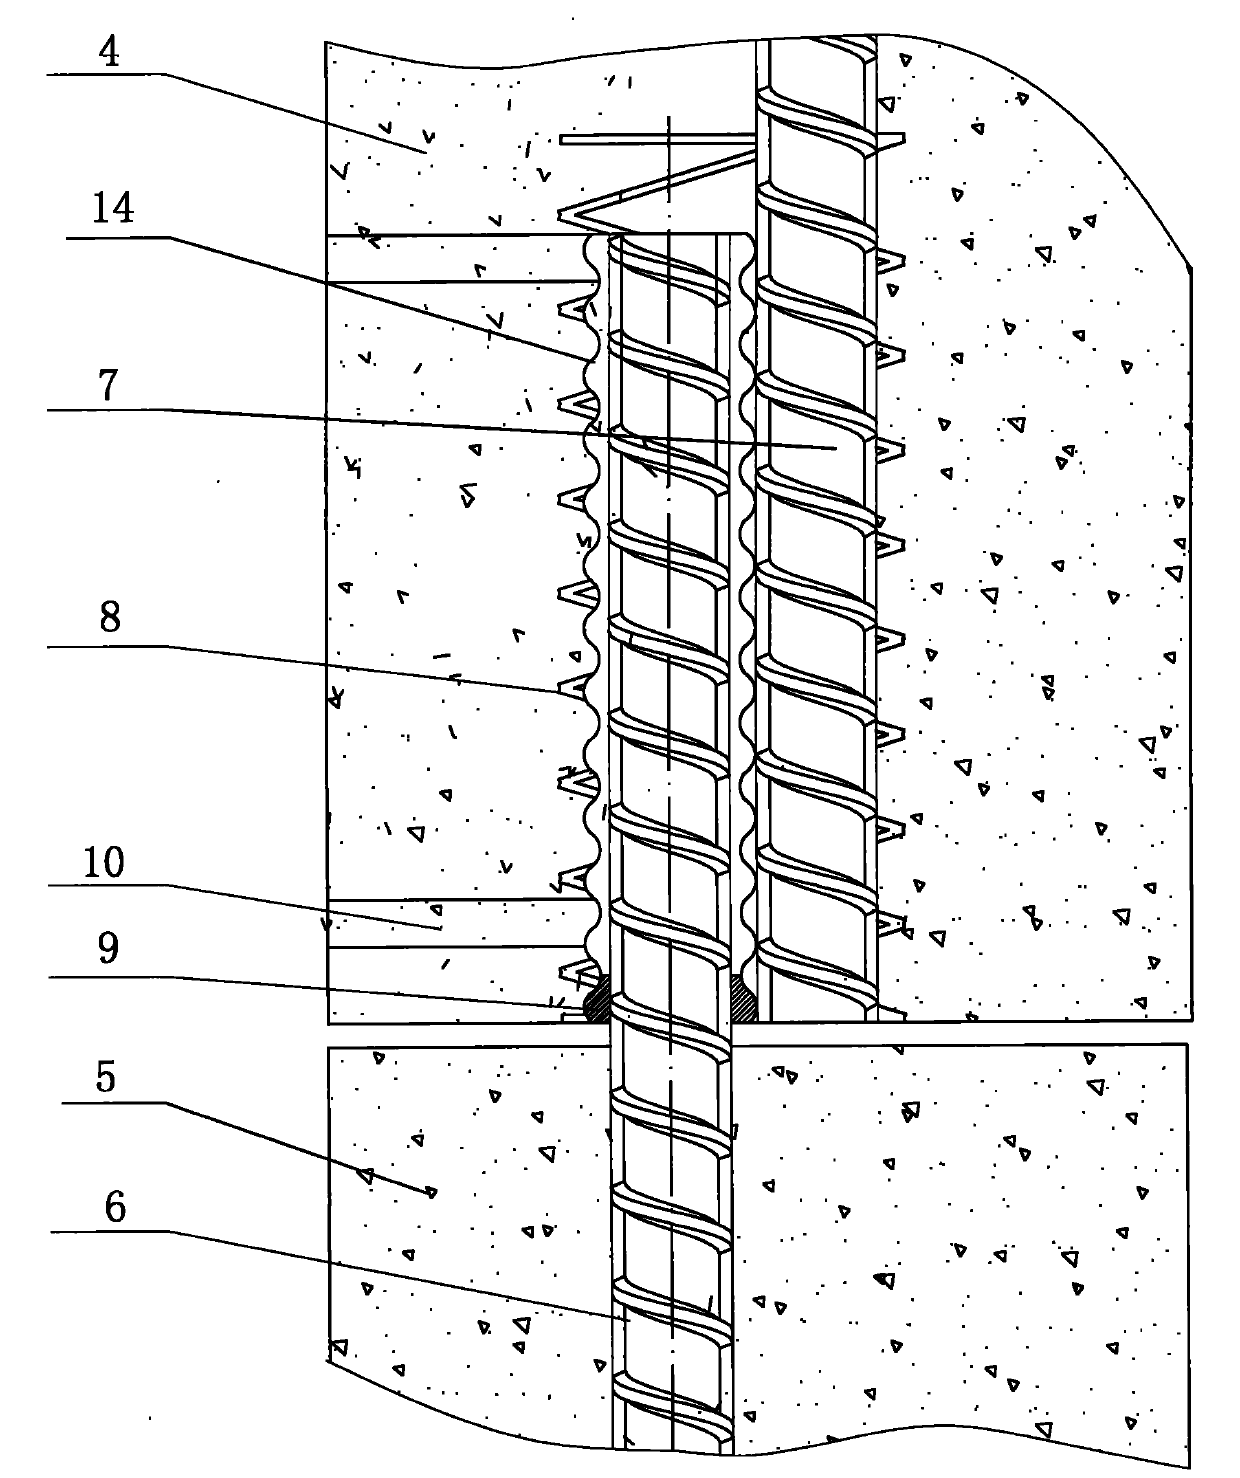 Pore forming method and pore forming part of special shape for connecting precast concrete units